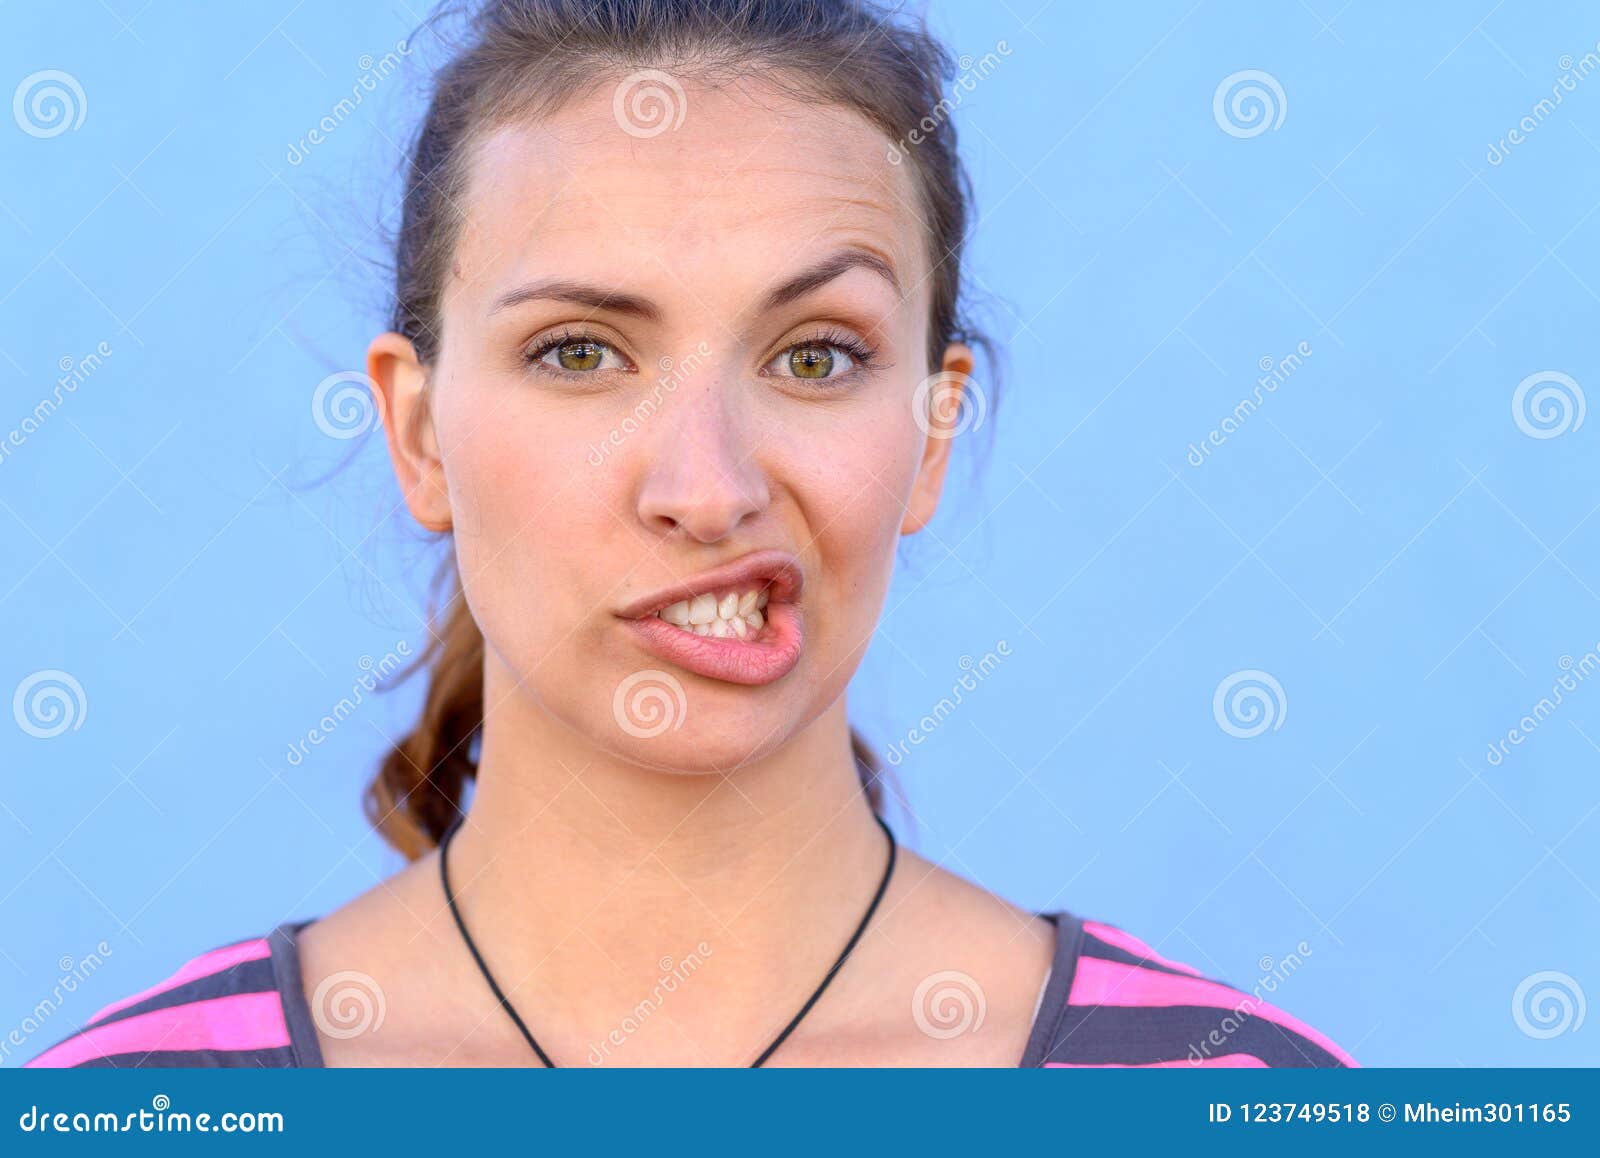 Attractive Young Woman Pulling a Funny Face Stock Photo - Image of  expression, portrait: 123749518